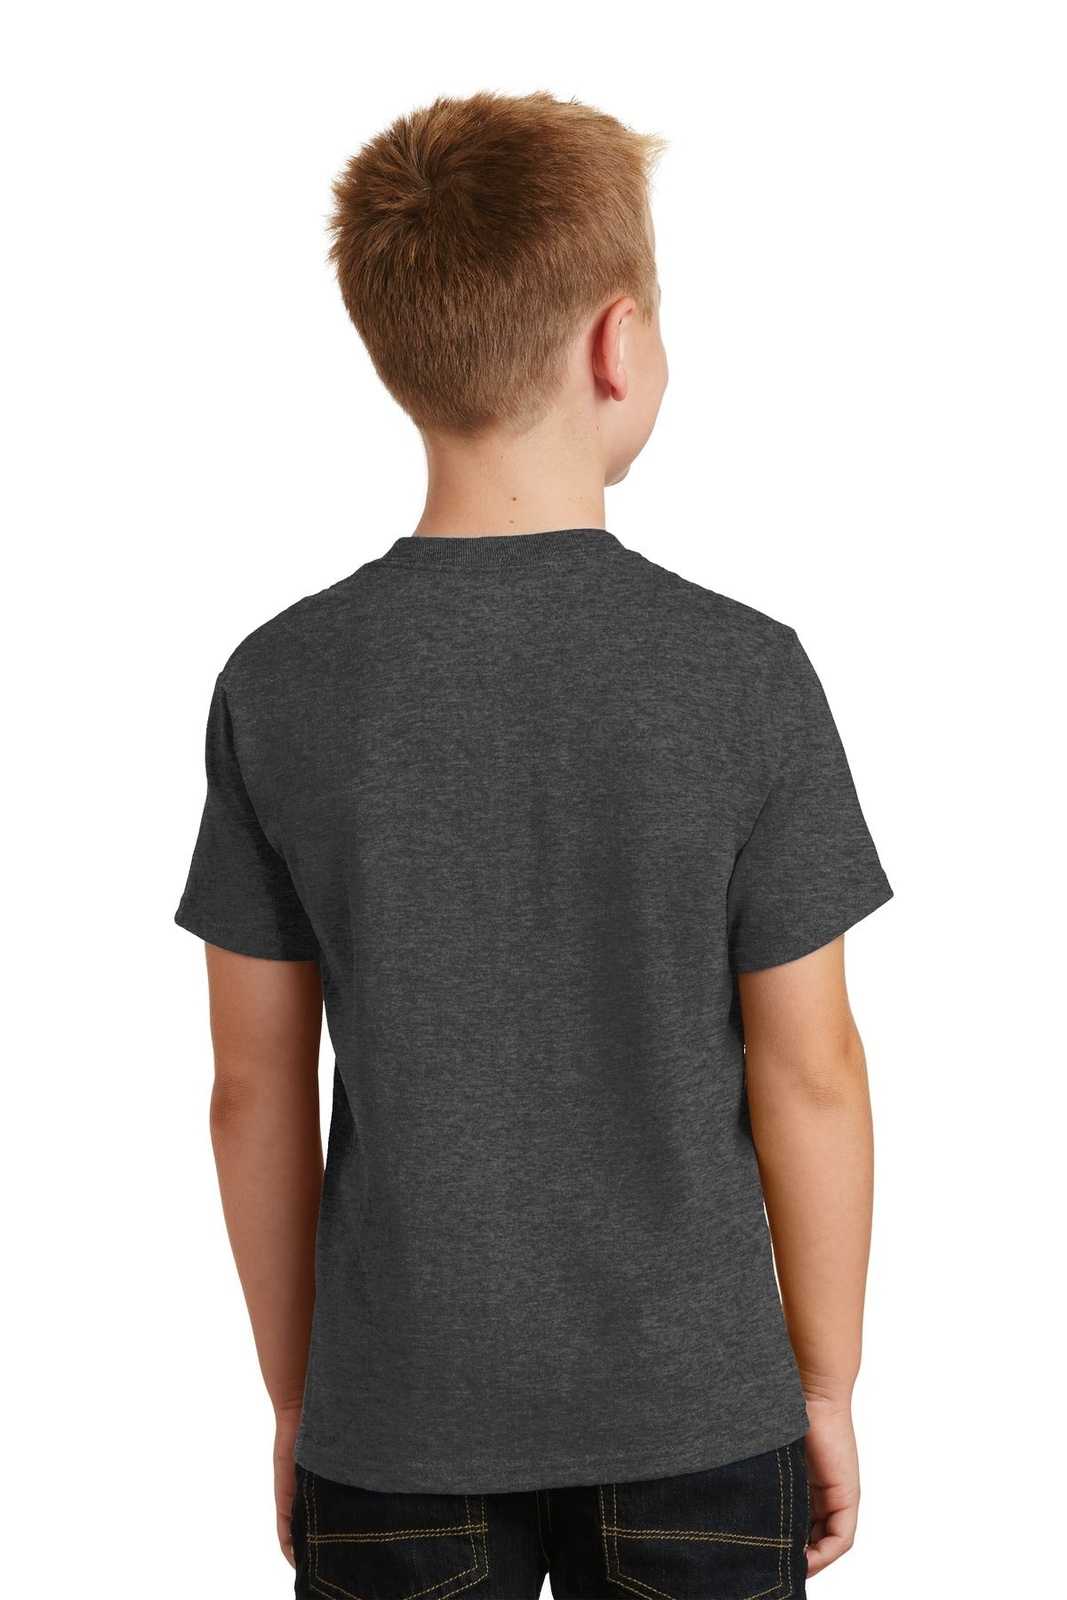 Port & Company PC54Y Youth Core Cotton Tee - Dark Heather Gray - HIT a Double - 1